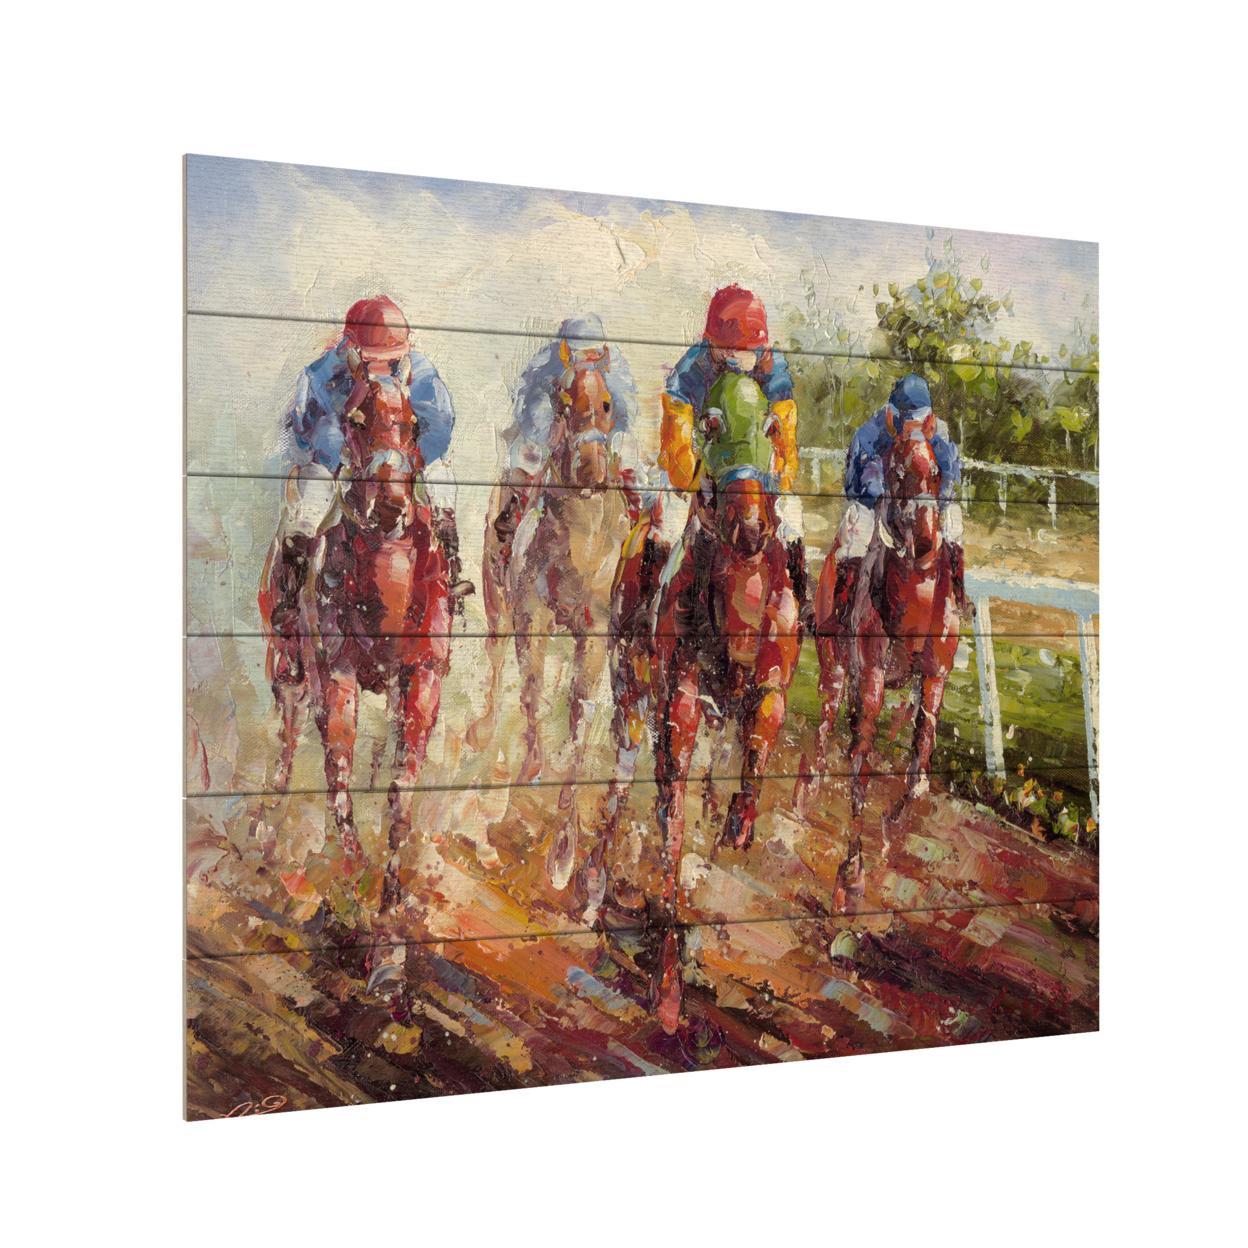 Wooden Slat Art 18 X 22 Inches Titled Kentucky Derby Ready To Hang Home Decor Picture